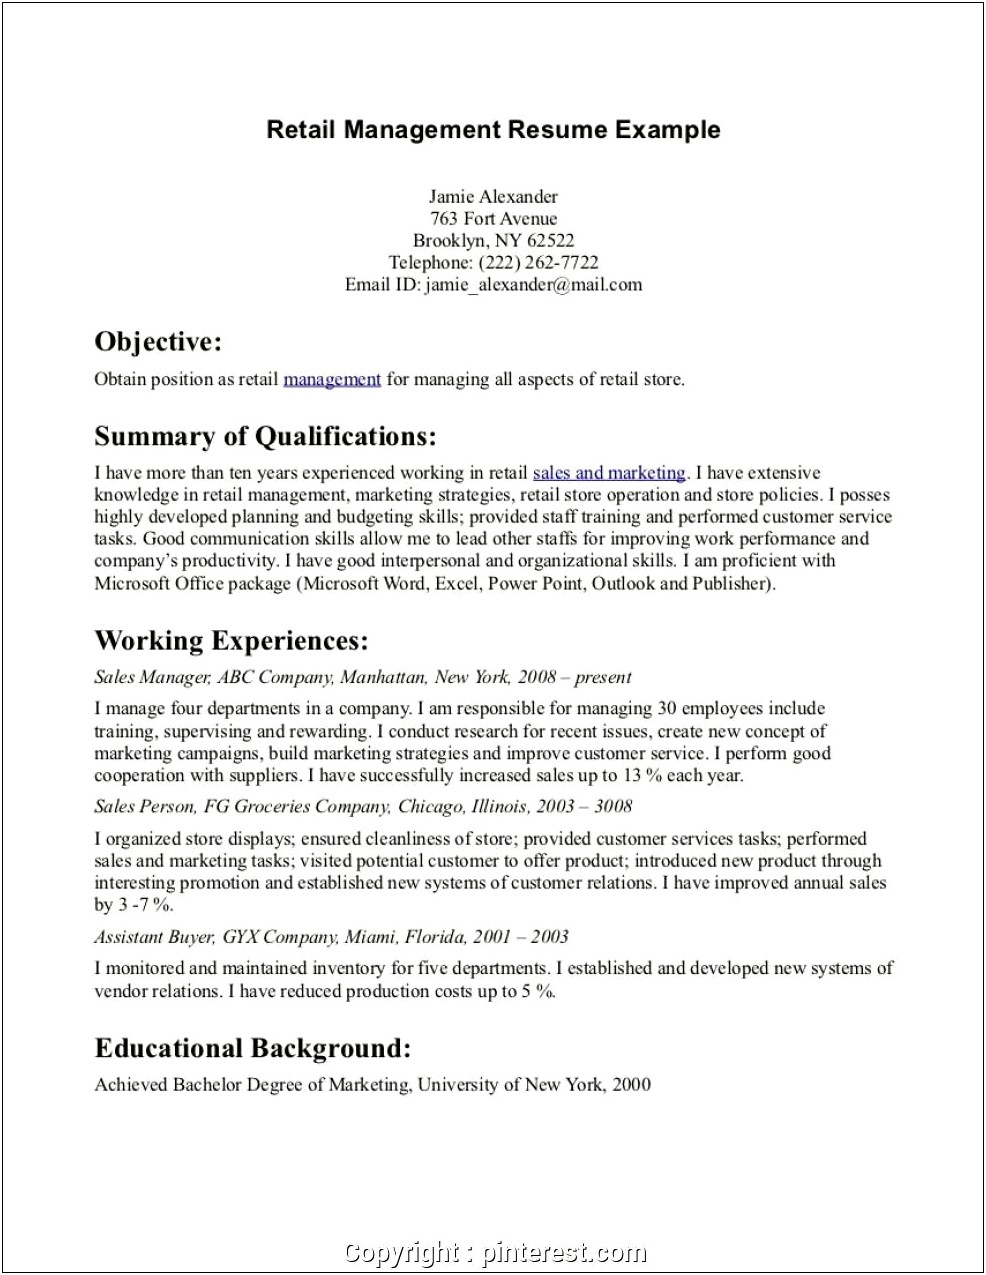 Resume Objectives For Retail District Manager